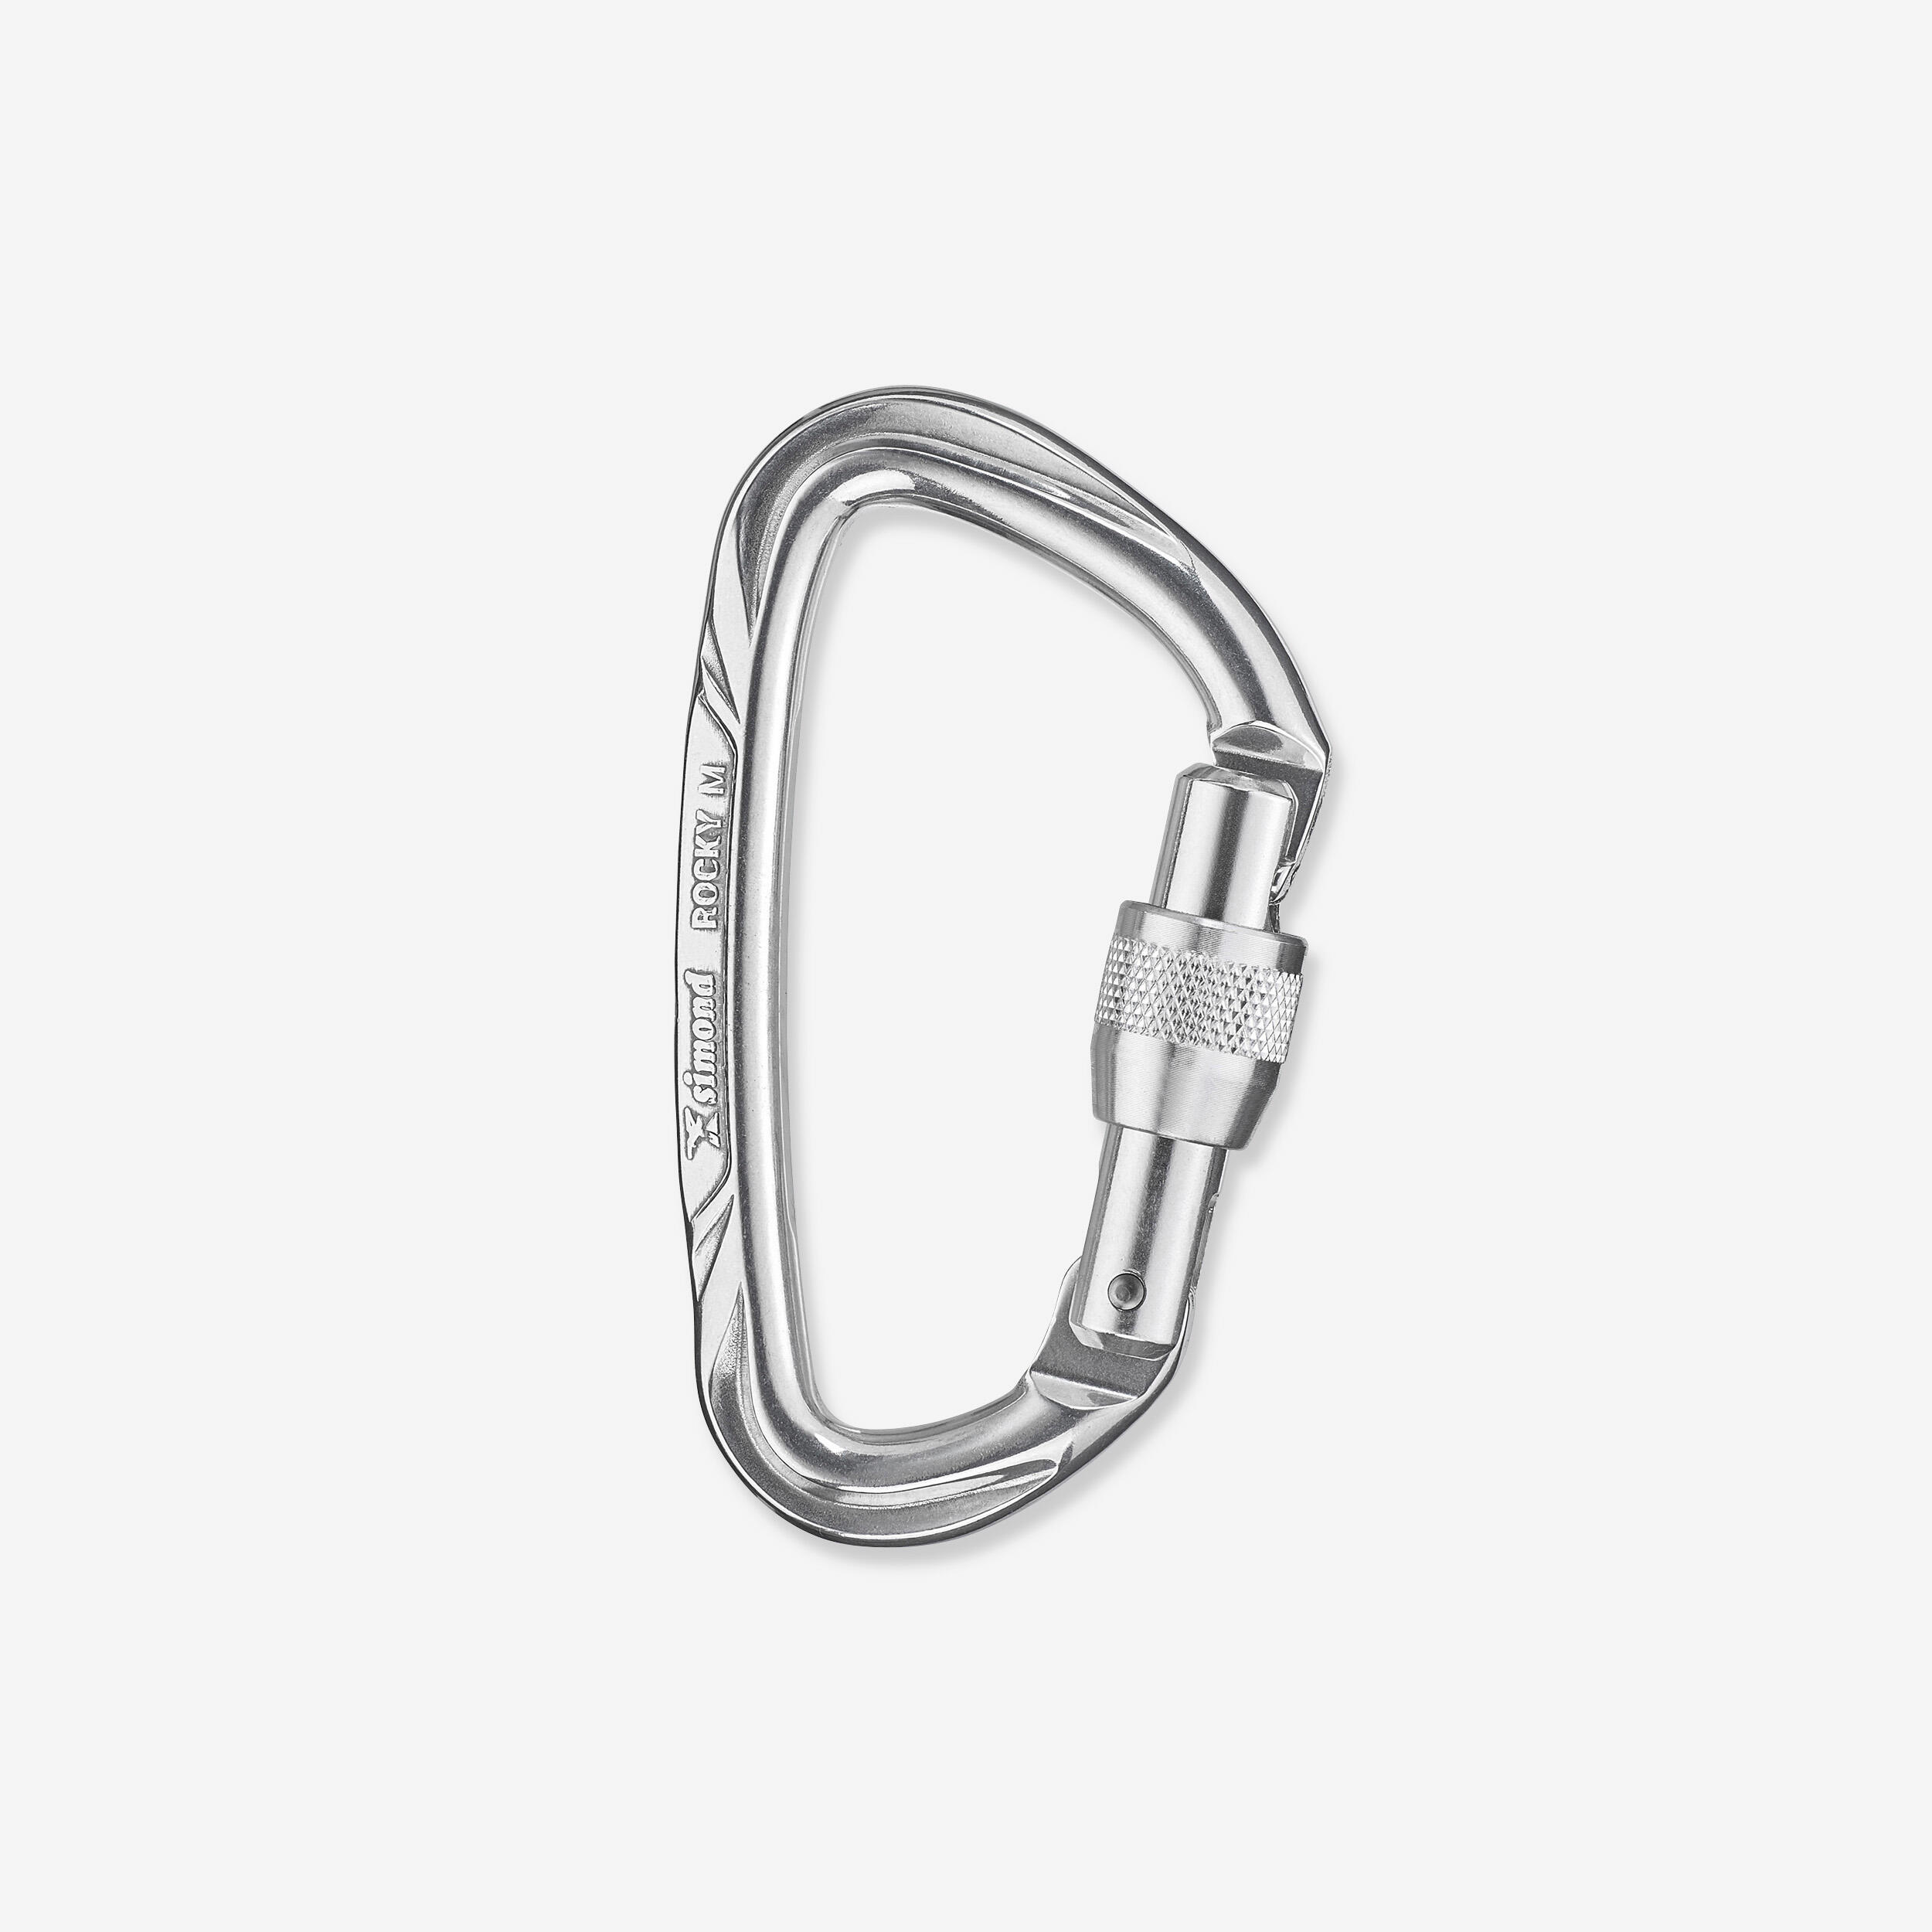 SIMOND CLIMBING AND MOUNTAINEERING SCREWGATE CARABINER - ROCKY M POLISHED